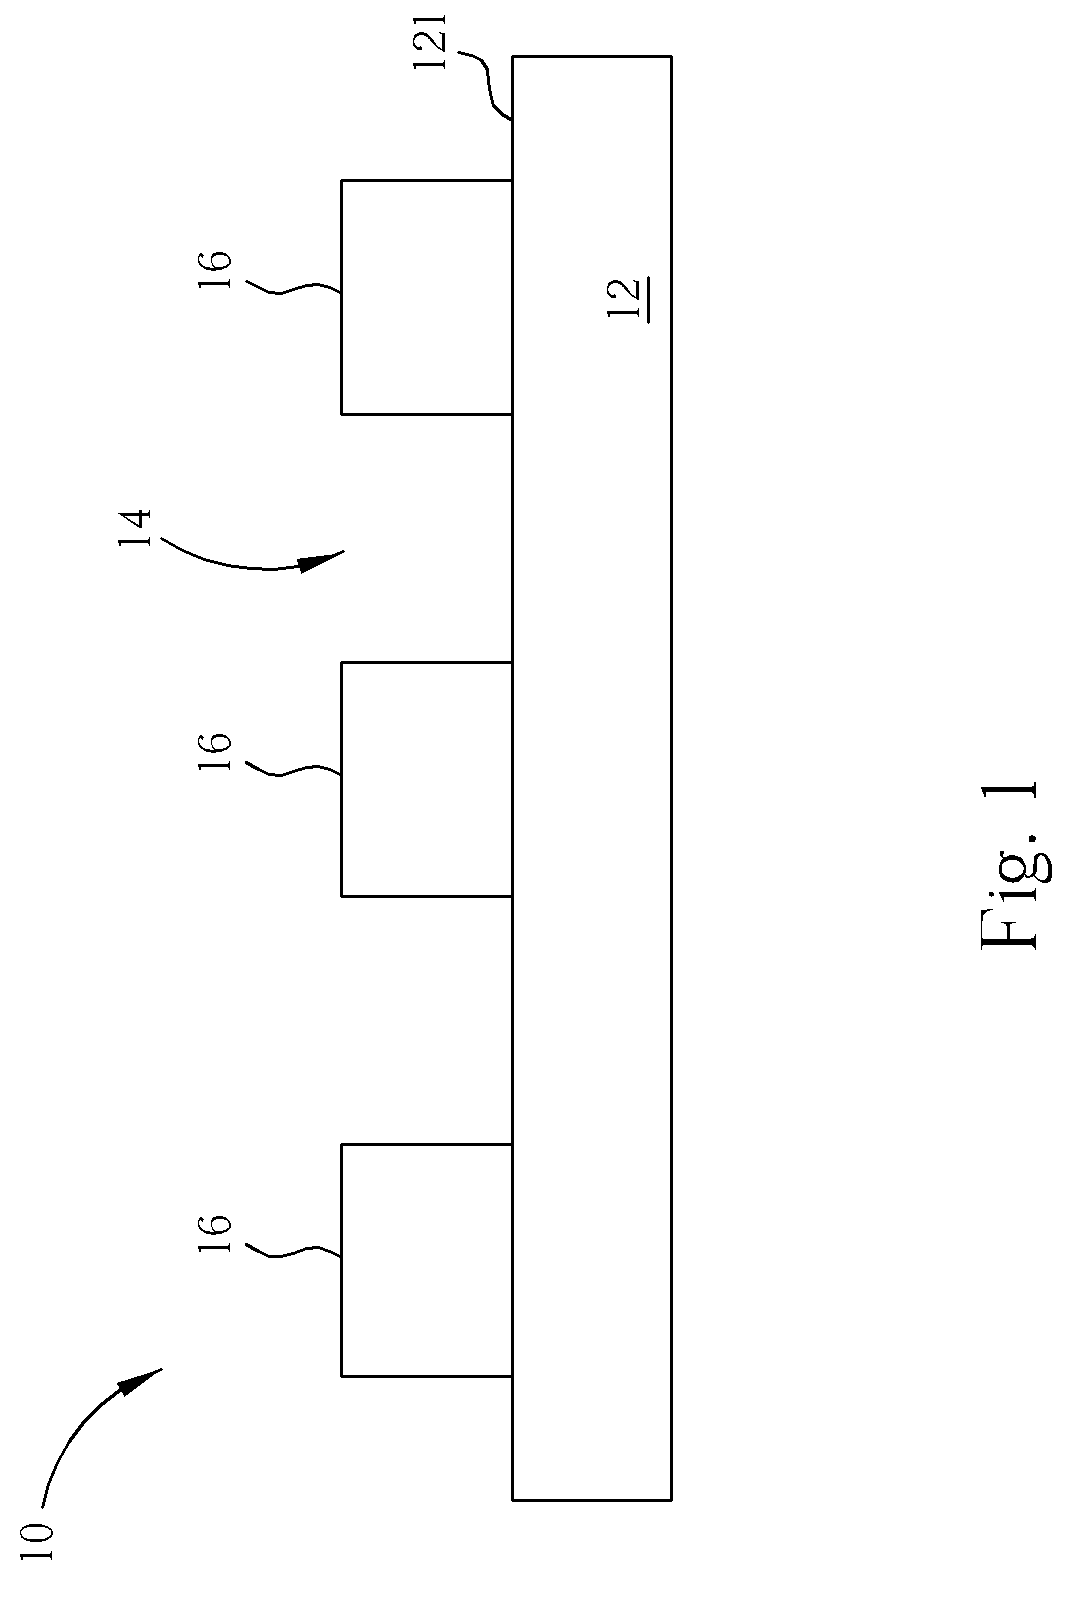 Method of wafer level packaging and cutting